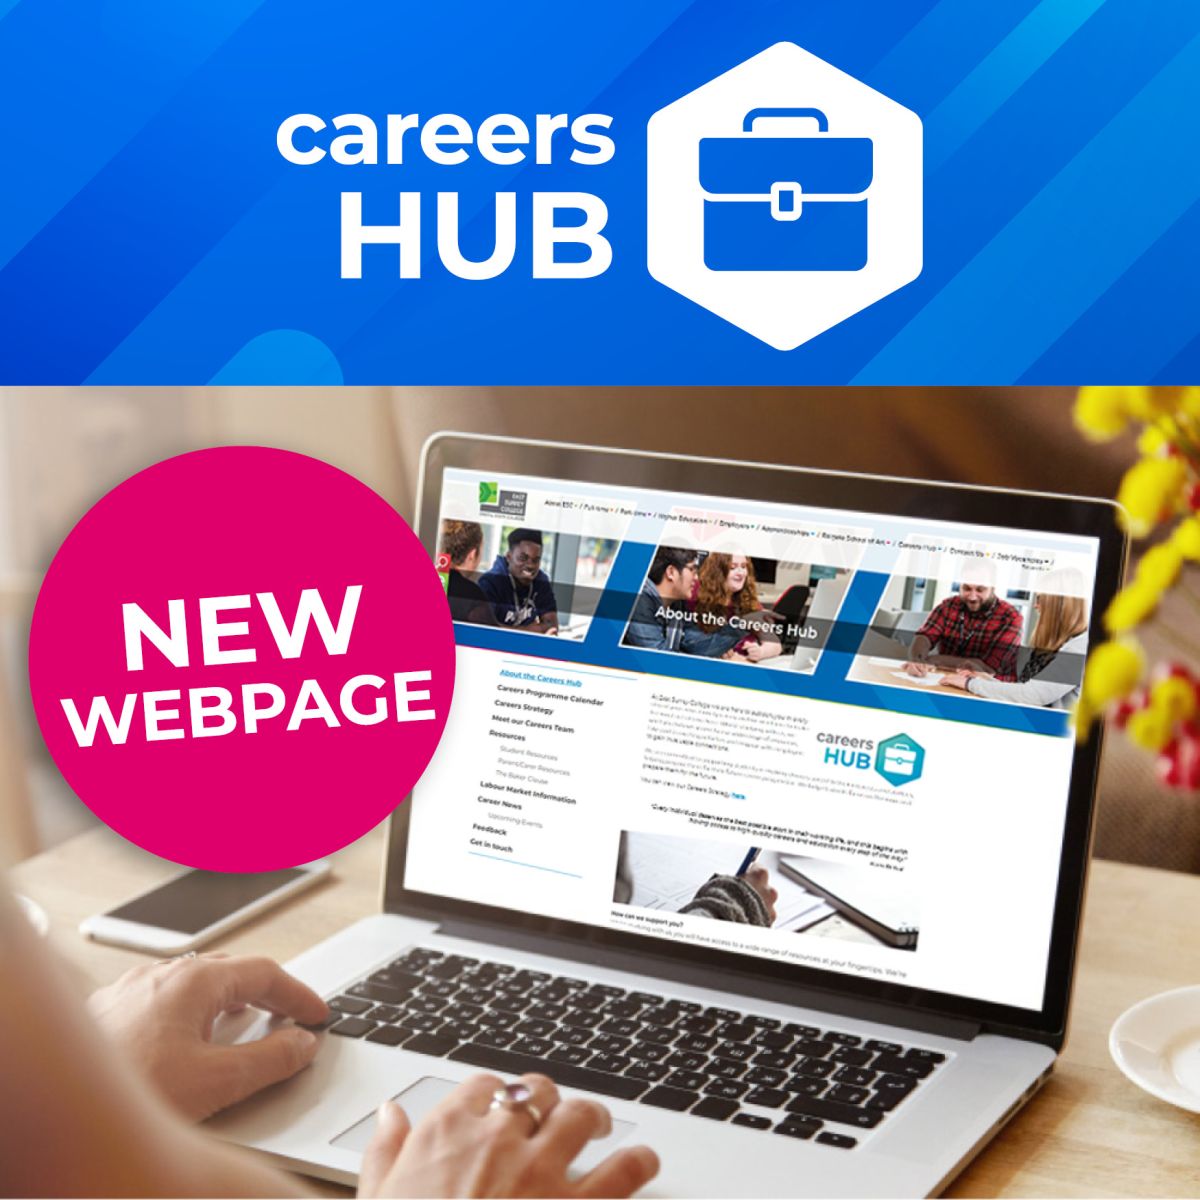 Careers Hub - New Webpage Launched!